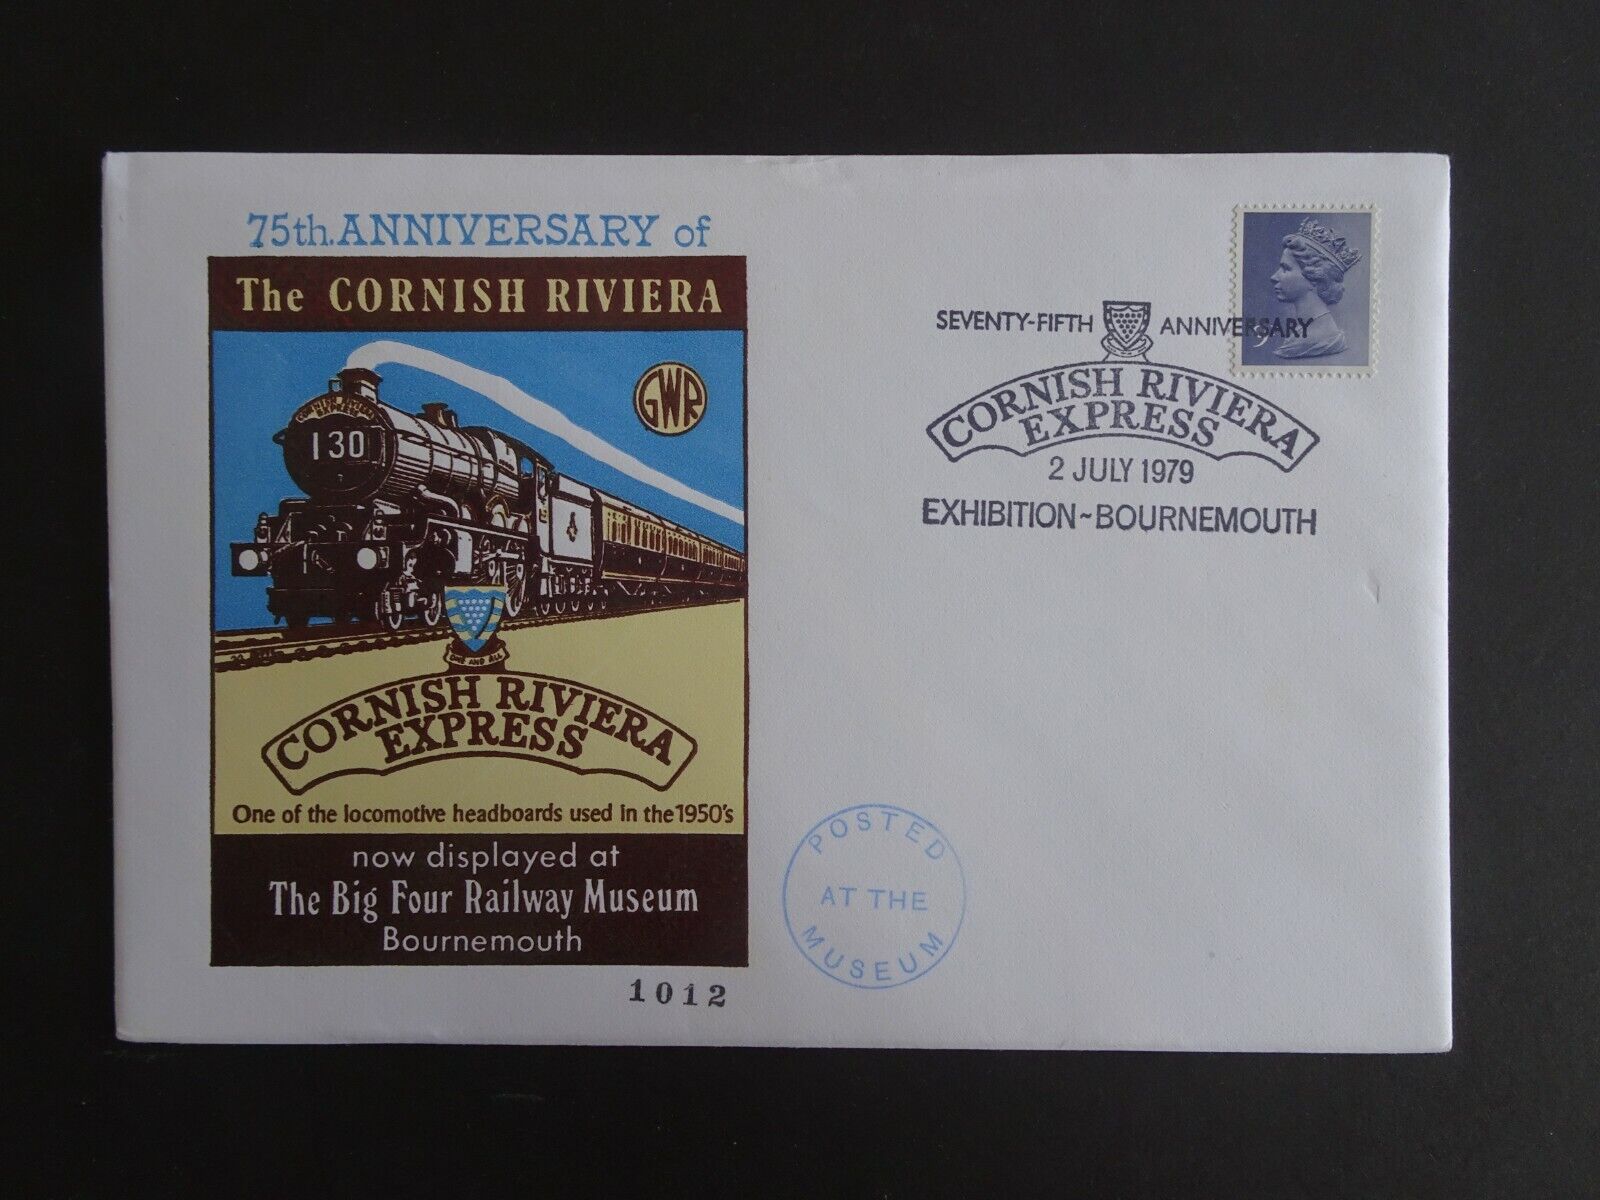 GB In a popularity 75th Anniversary At the price of Cornish Riviera - MUSEUM BIG FOUR RAILWAY